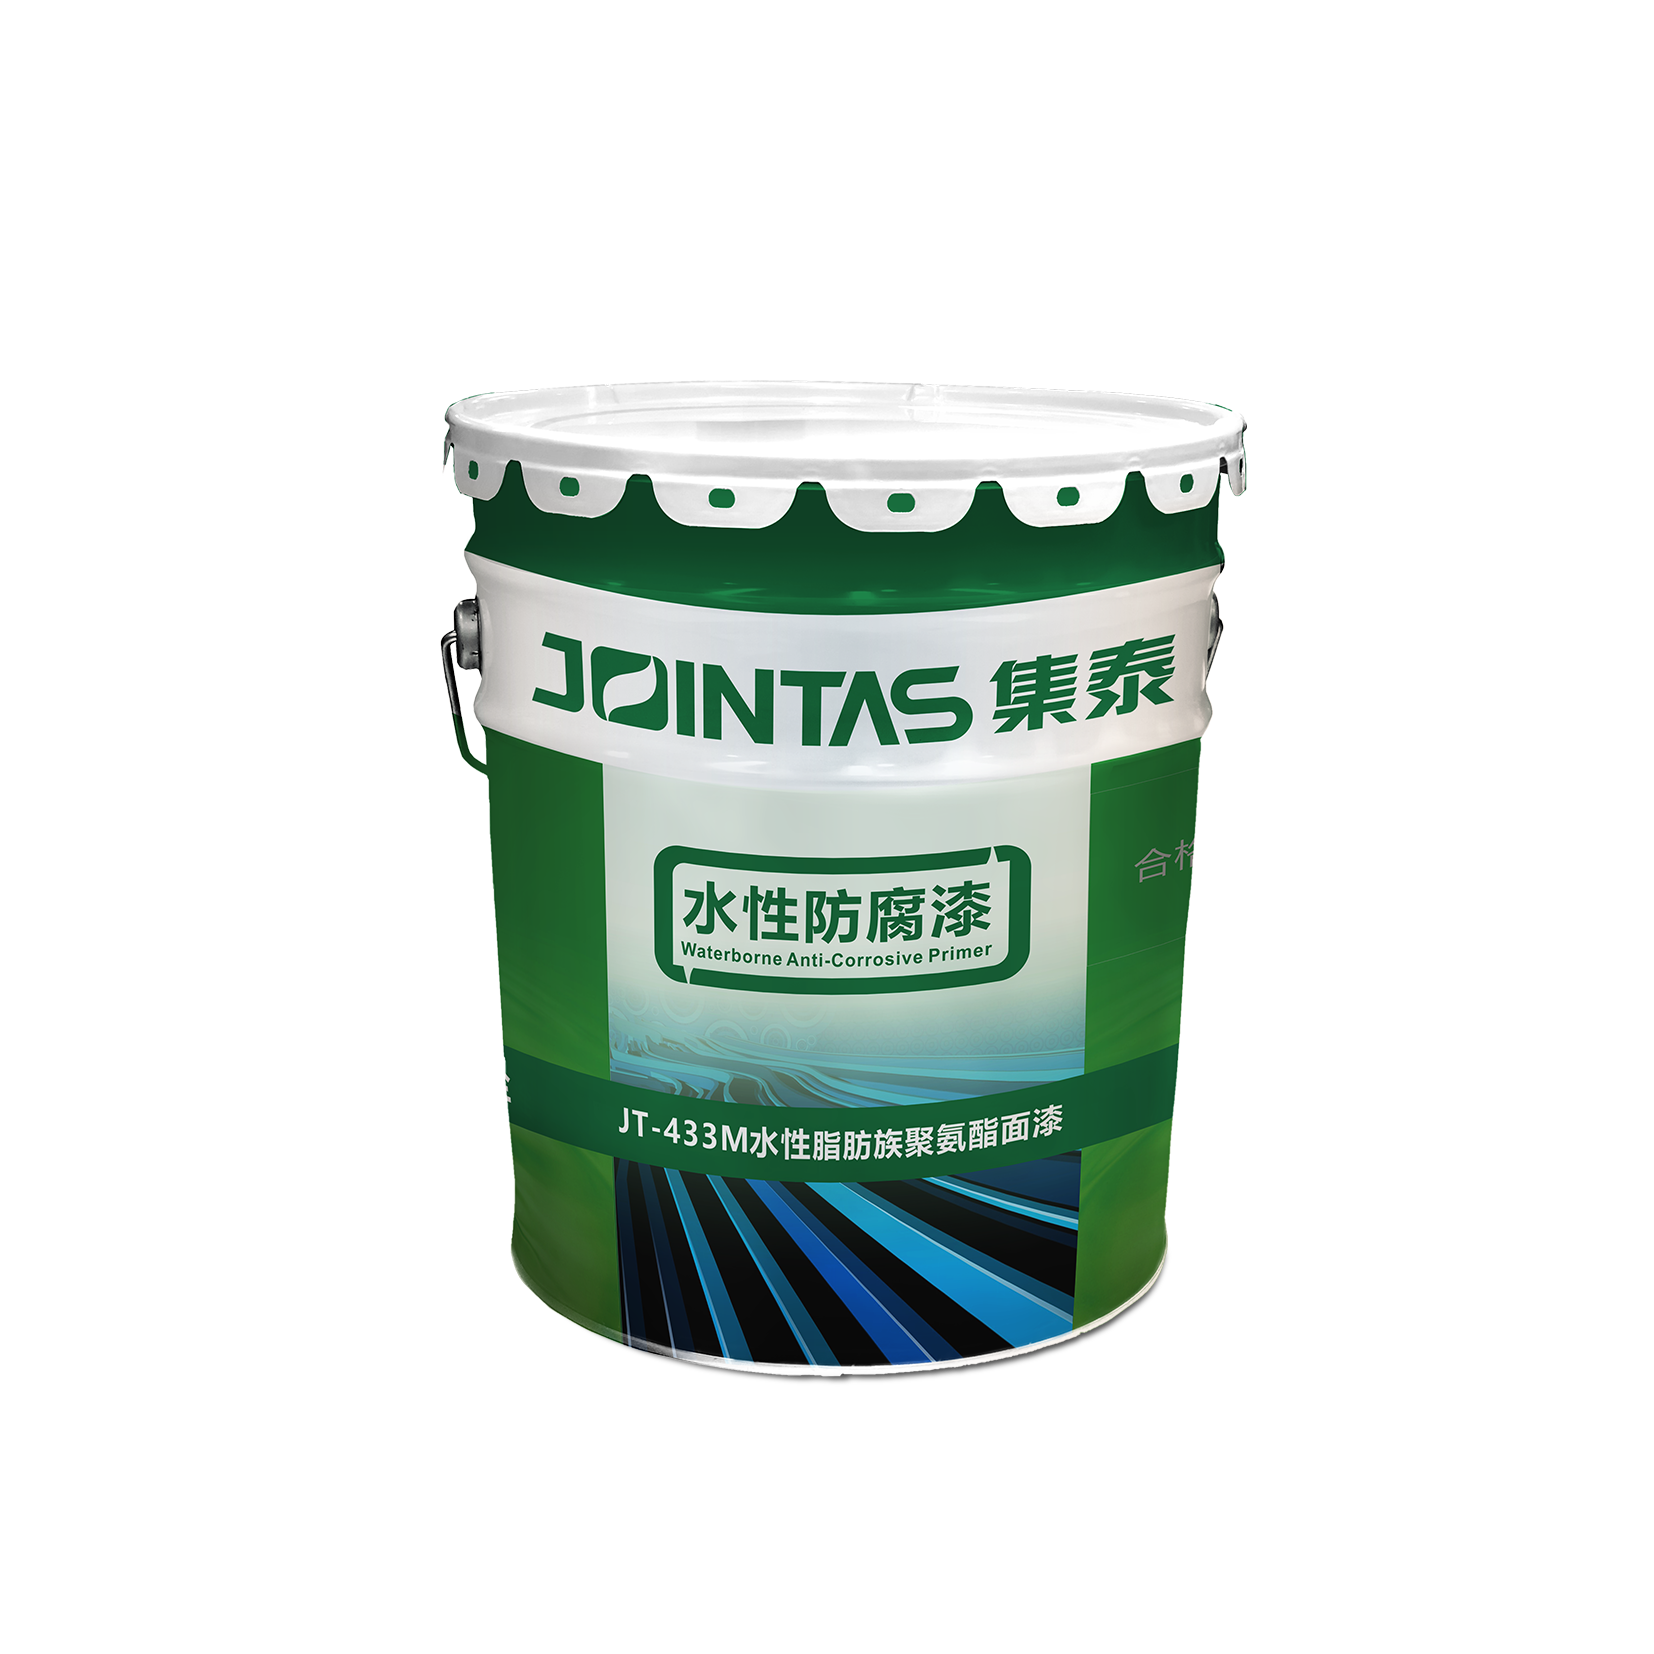 JT-433M Water-Based Two-Component Aliphatic Polyurethane Top Coating